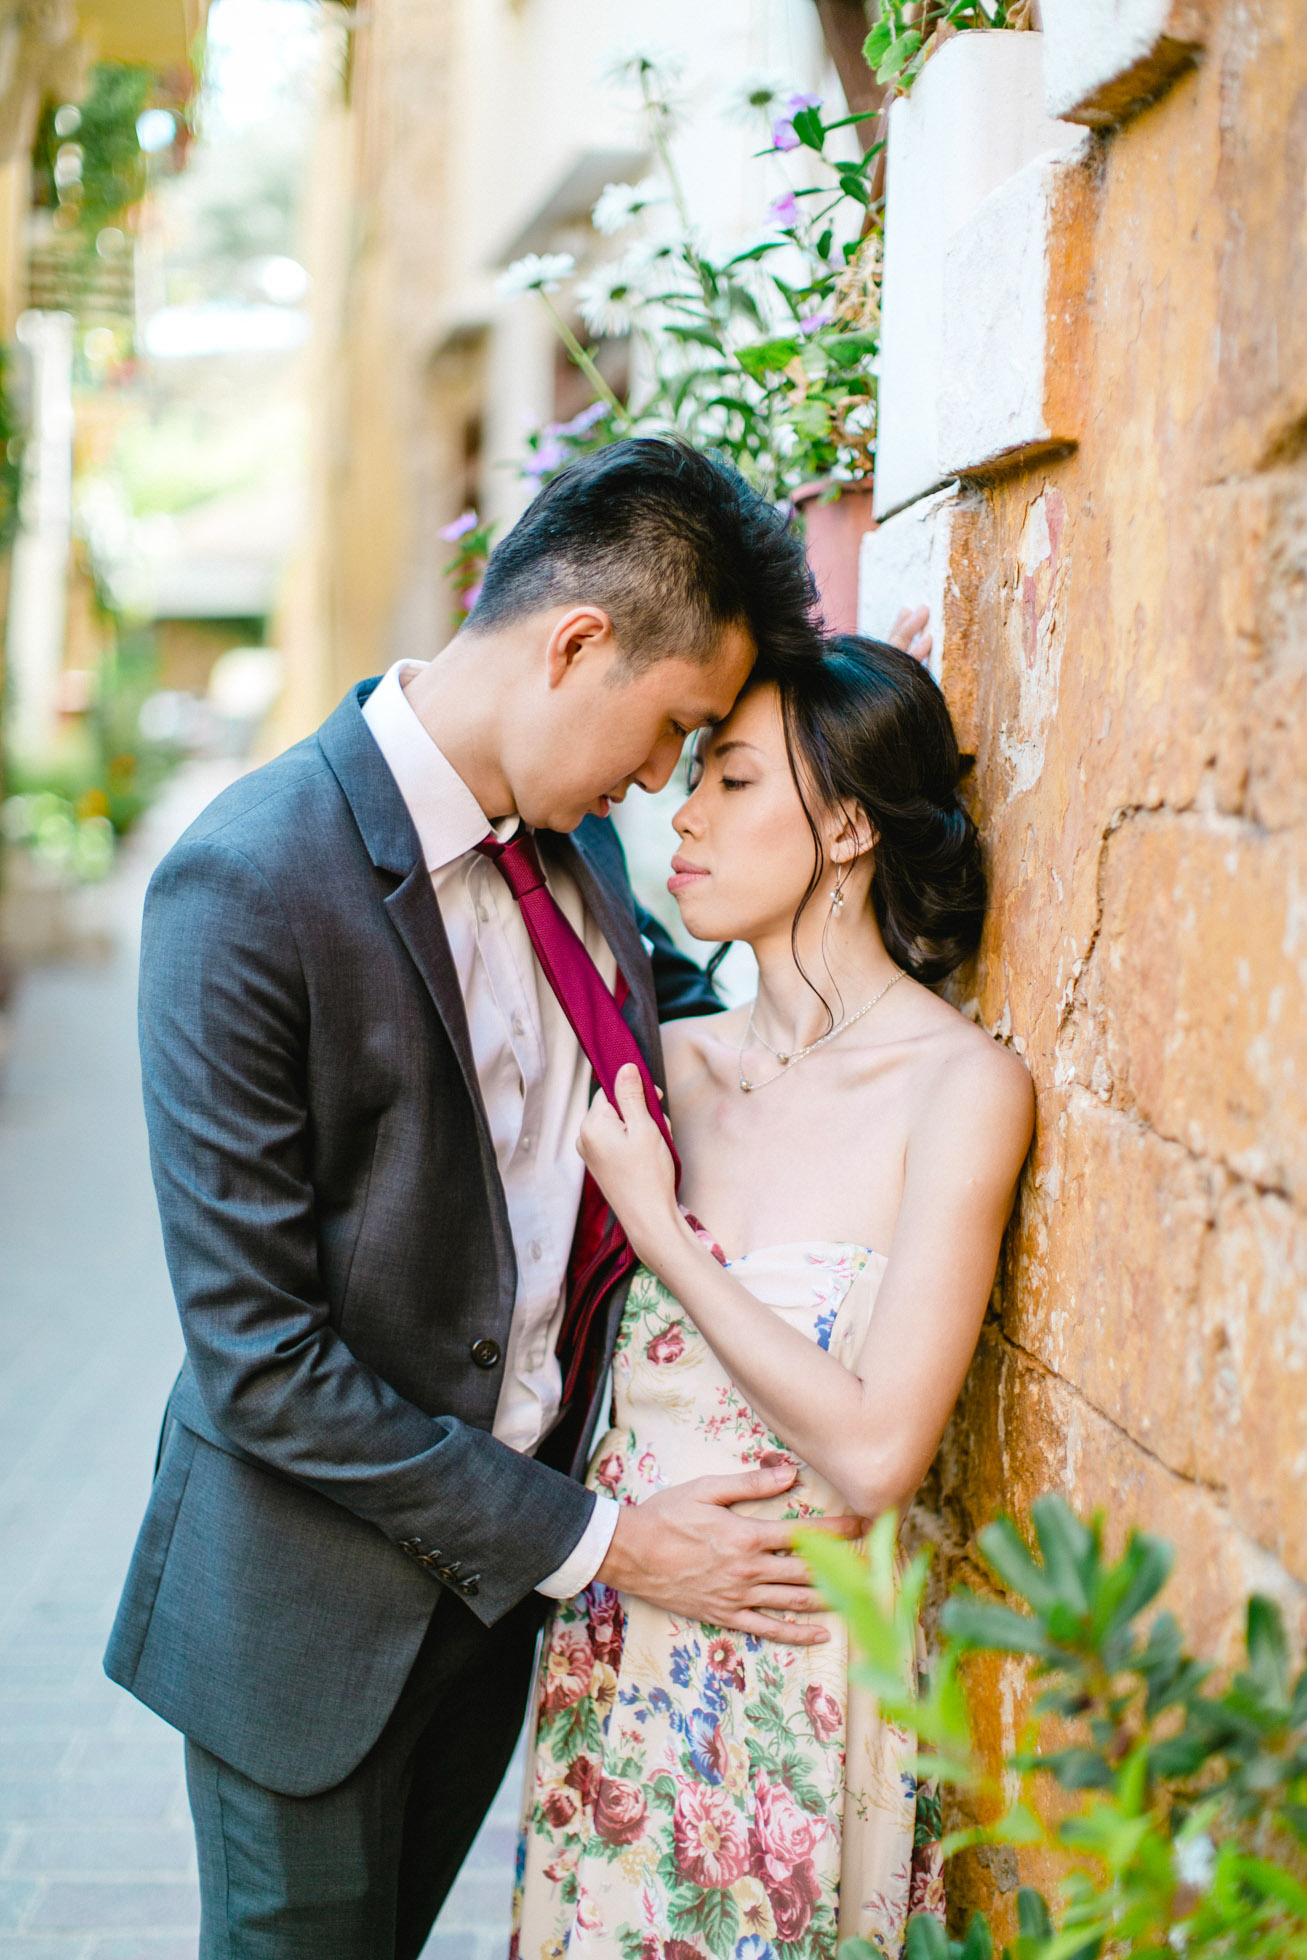 Young Asian couple in love during their engagement portrait session in old town of Chania, Crete. They're hugging and posing for photos with the backdrop of Greek architecture.